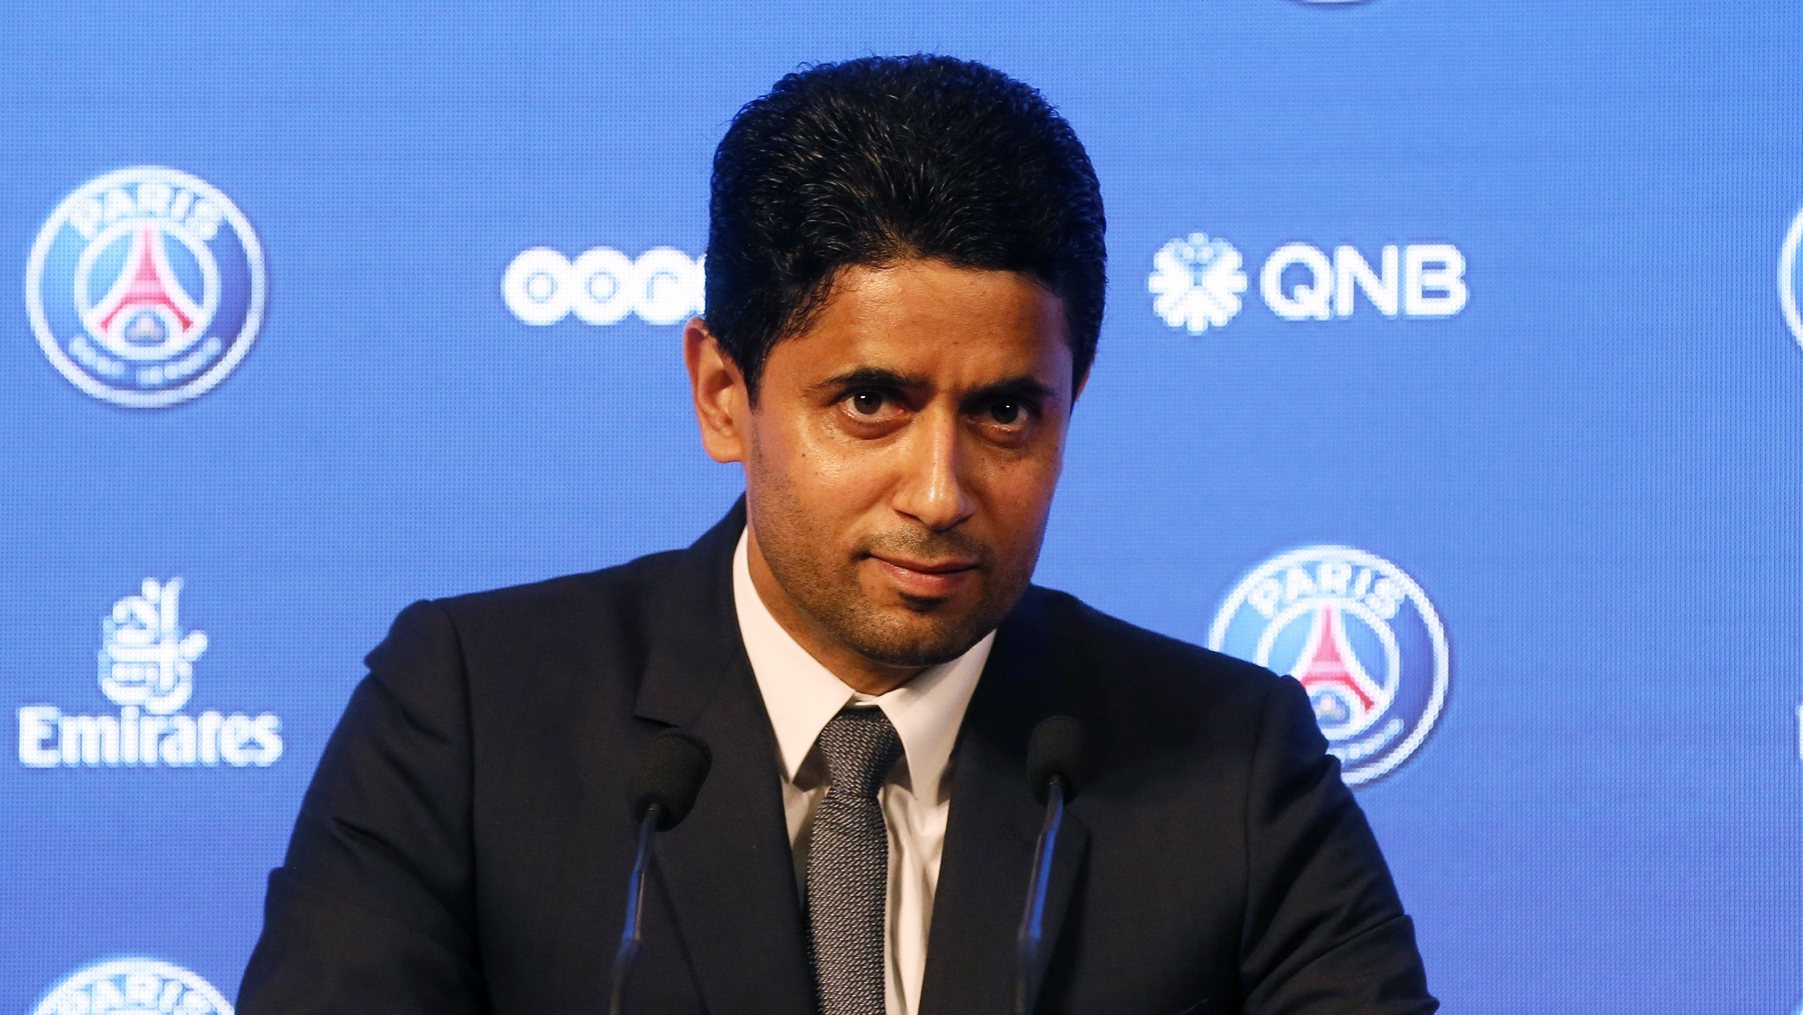 epa07596195 (FILE) - PSG president Nasser Al-Khelaifi attends a press conference during the presentation of new Paris Saint Germain player Kylian Mbappe (unseen) in Paris, France, 06 September 2017 (reissued 24 May 2019). Nasser Al-Khelaifi is under investigation in France for alleged bribery in Doha&#039;s bid to host the IAAF Athletics World Championship it was confirmed 23 May 2019.  EPA/ETIENNE LAURENT *** Local Caption *** 53750817